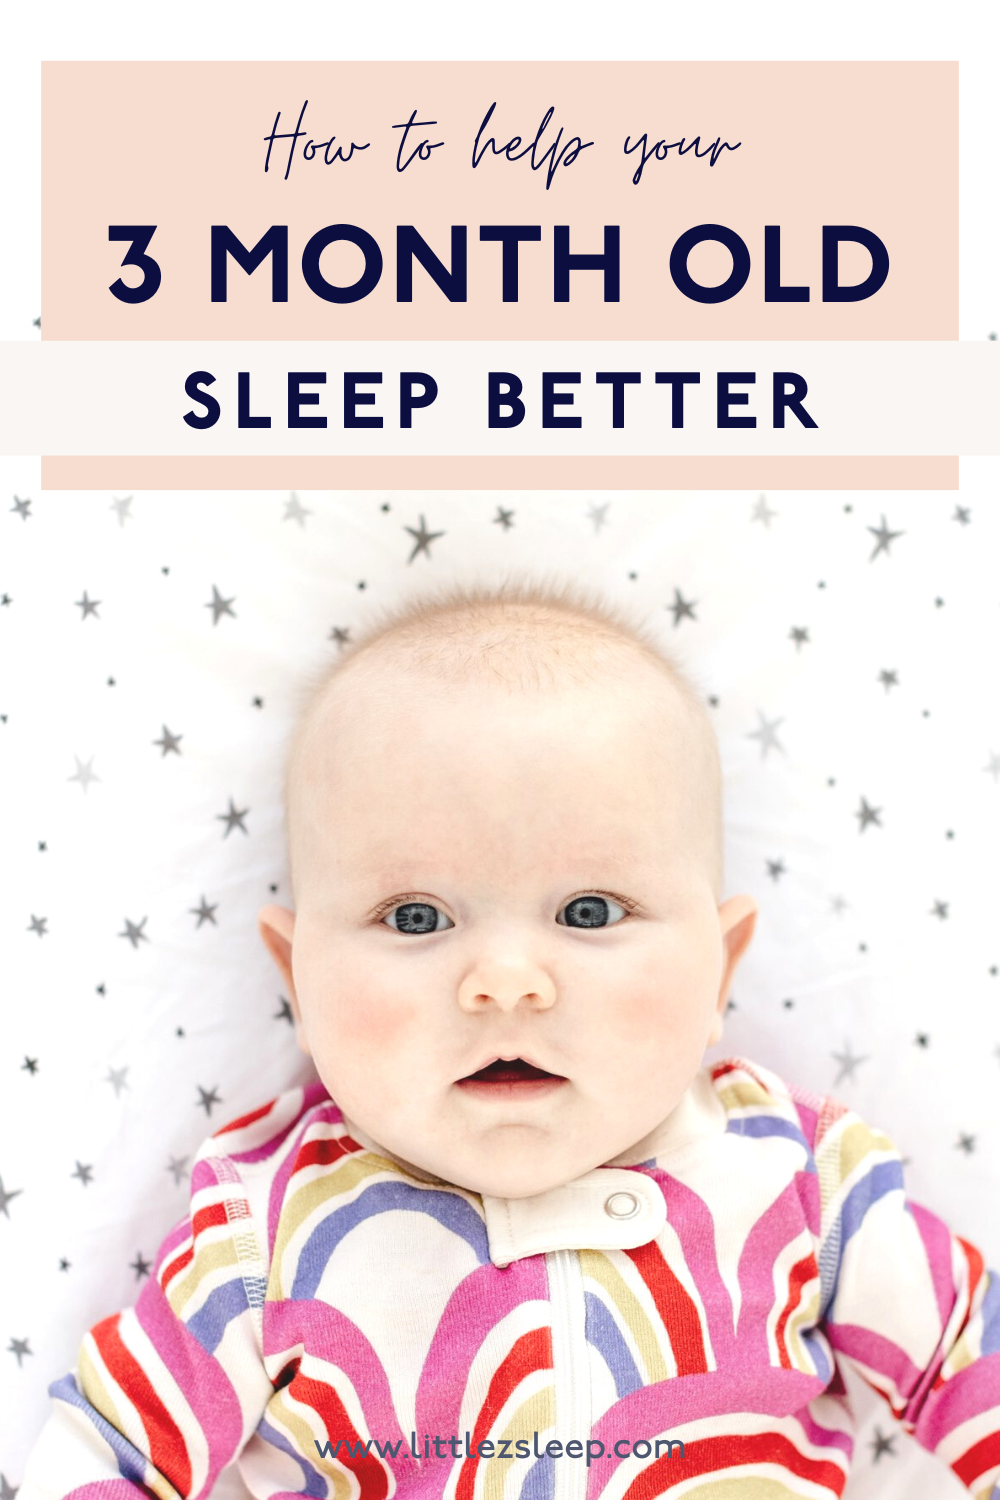 How to Help Your 3 Month Old Sleep Better